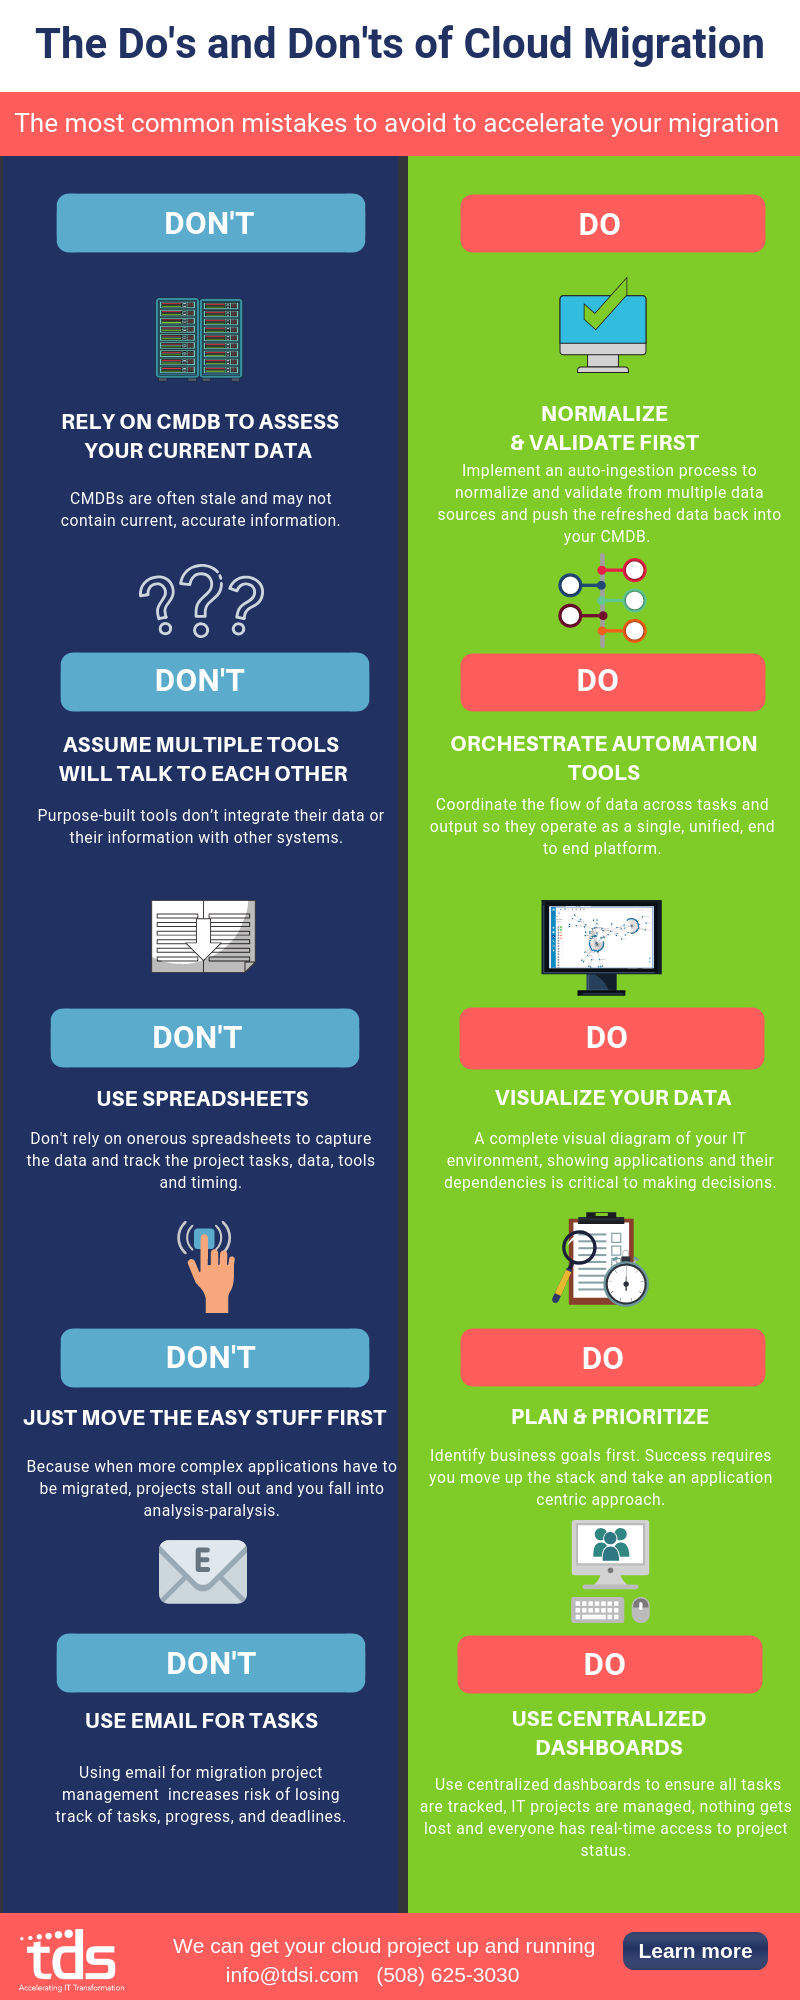 Do's and Don't of Cloud Migration Infographic